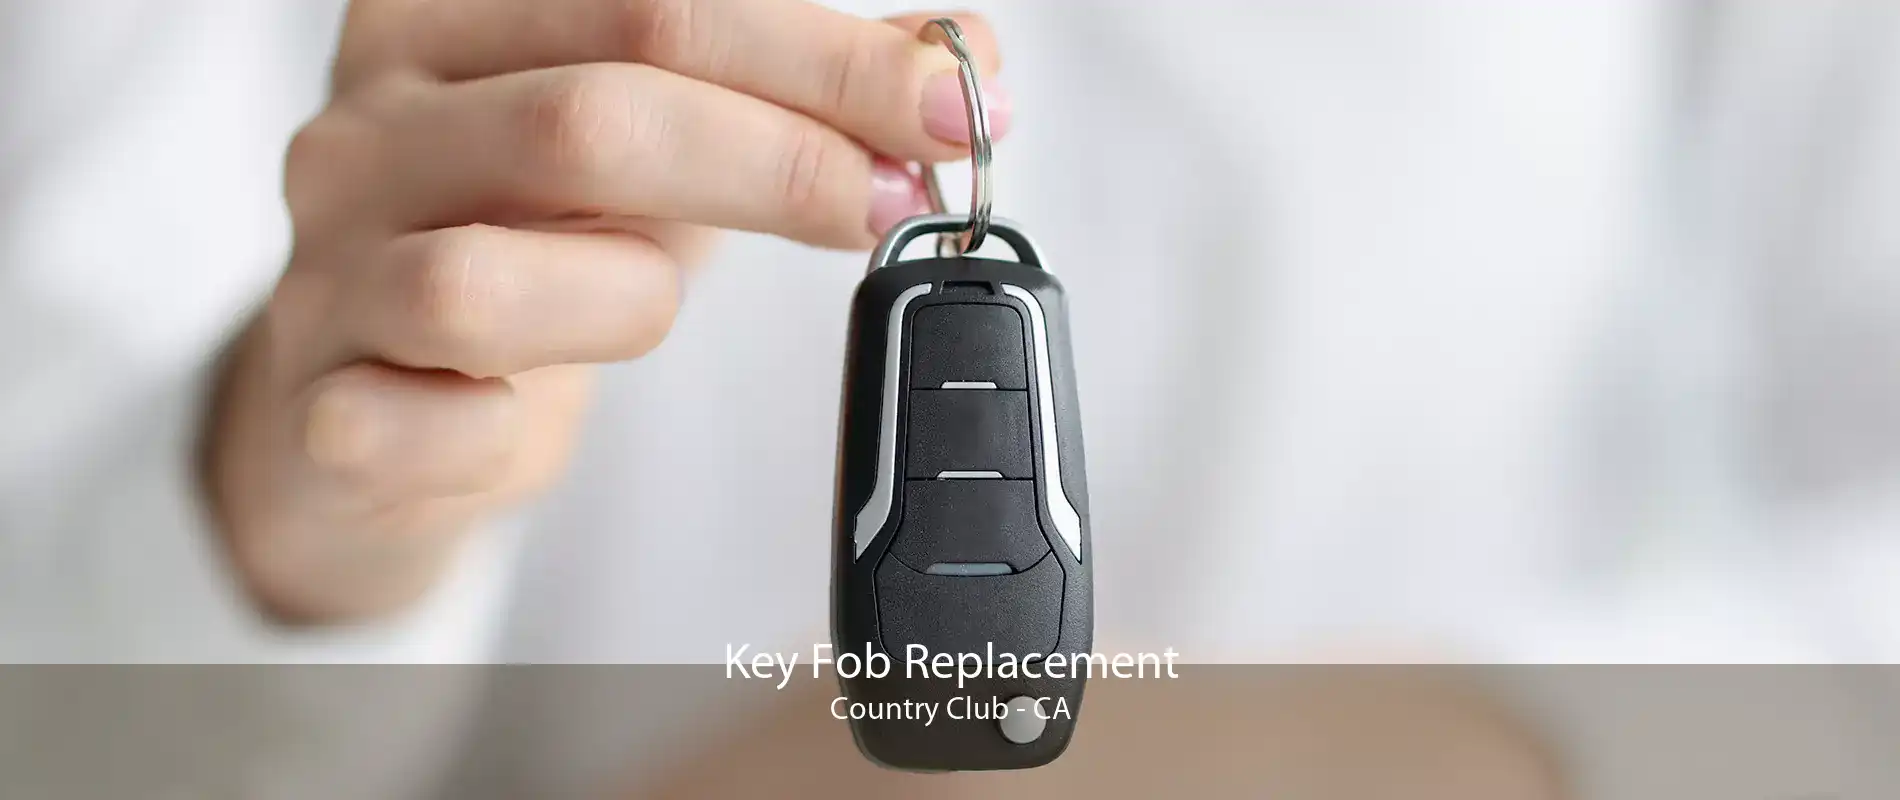 Key Fob Replacement Country Club - CA